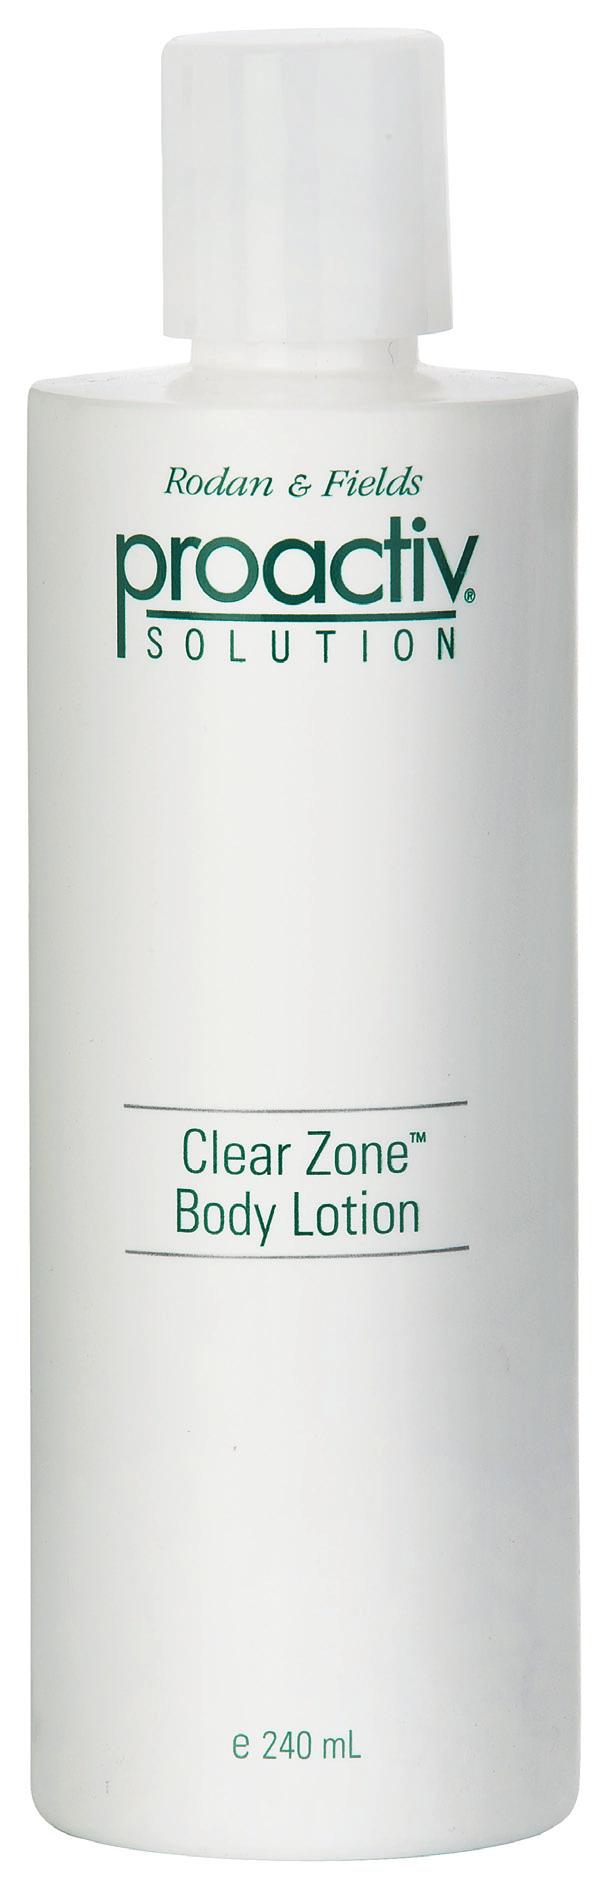 Cleansing Body bar Clear Zone Body Lotion Want a lather-rich bar for the shor that fights body breakouts, too. Cleansing Body Bar. There s something comforting about a bar of soap.